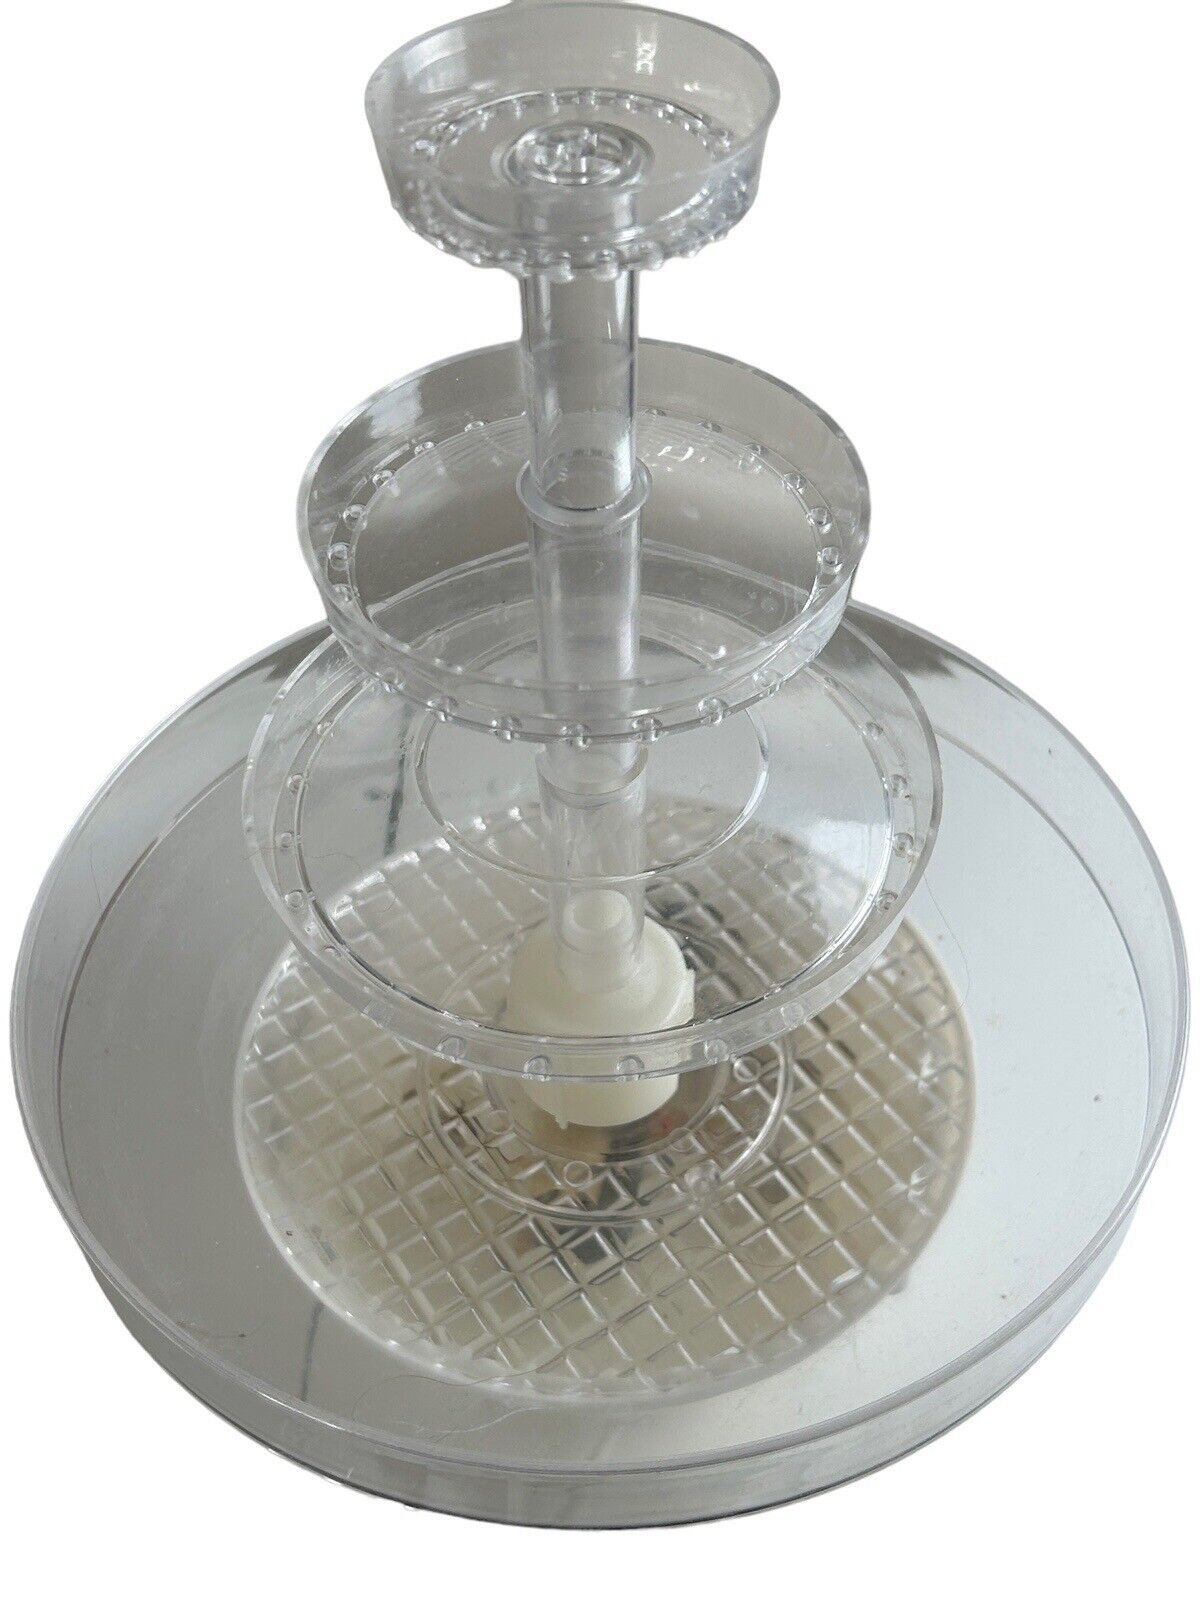 Wilton Fanci Flow Tabletop Water Fountain for Tiered Cakes PARTS OR REPAIR